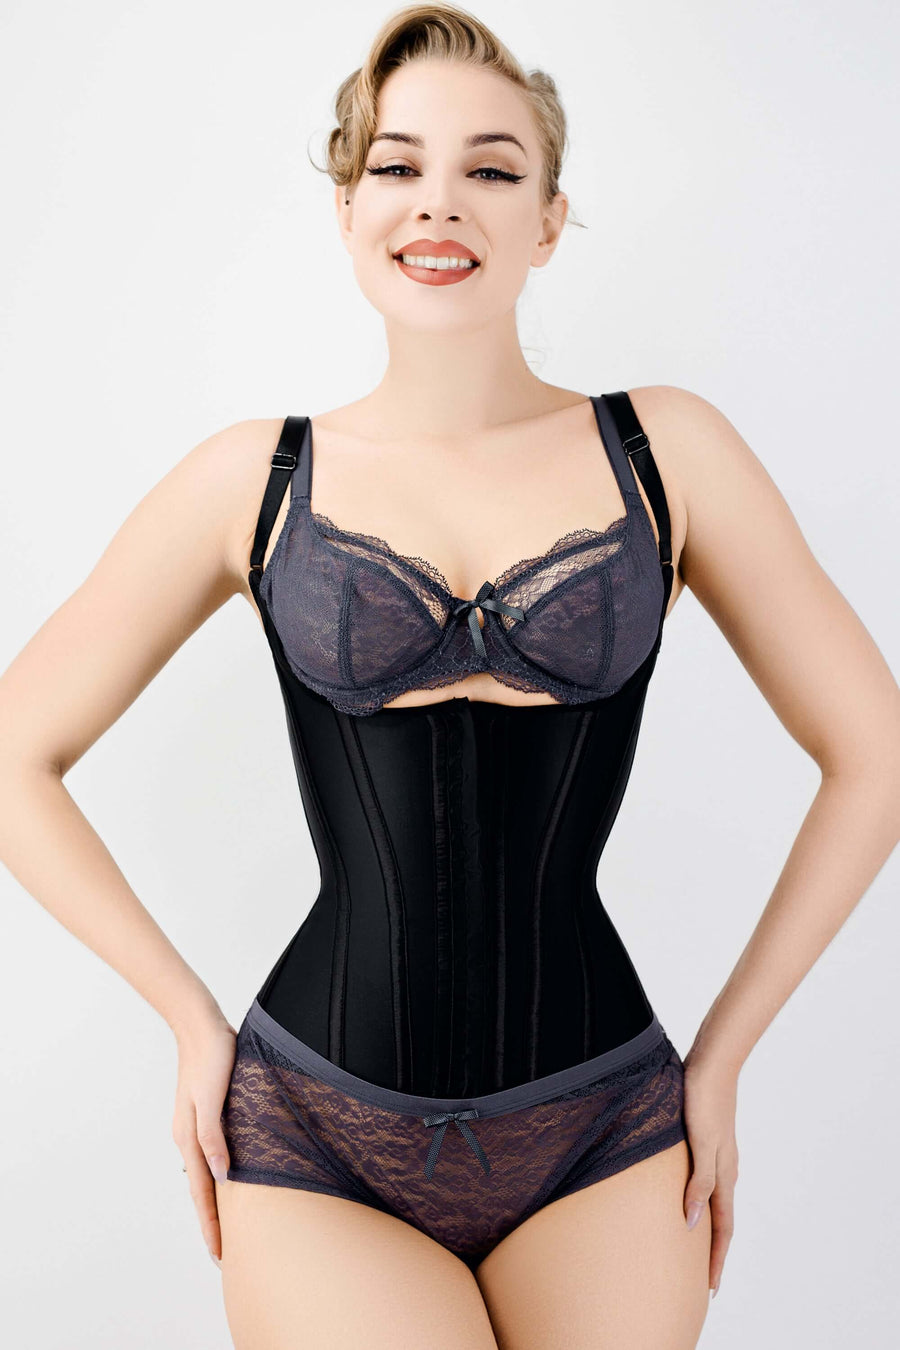 French lingerie: lace, clasps, and optical illusions